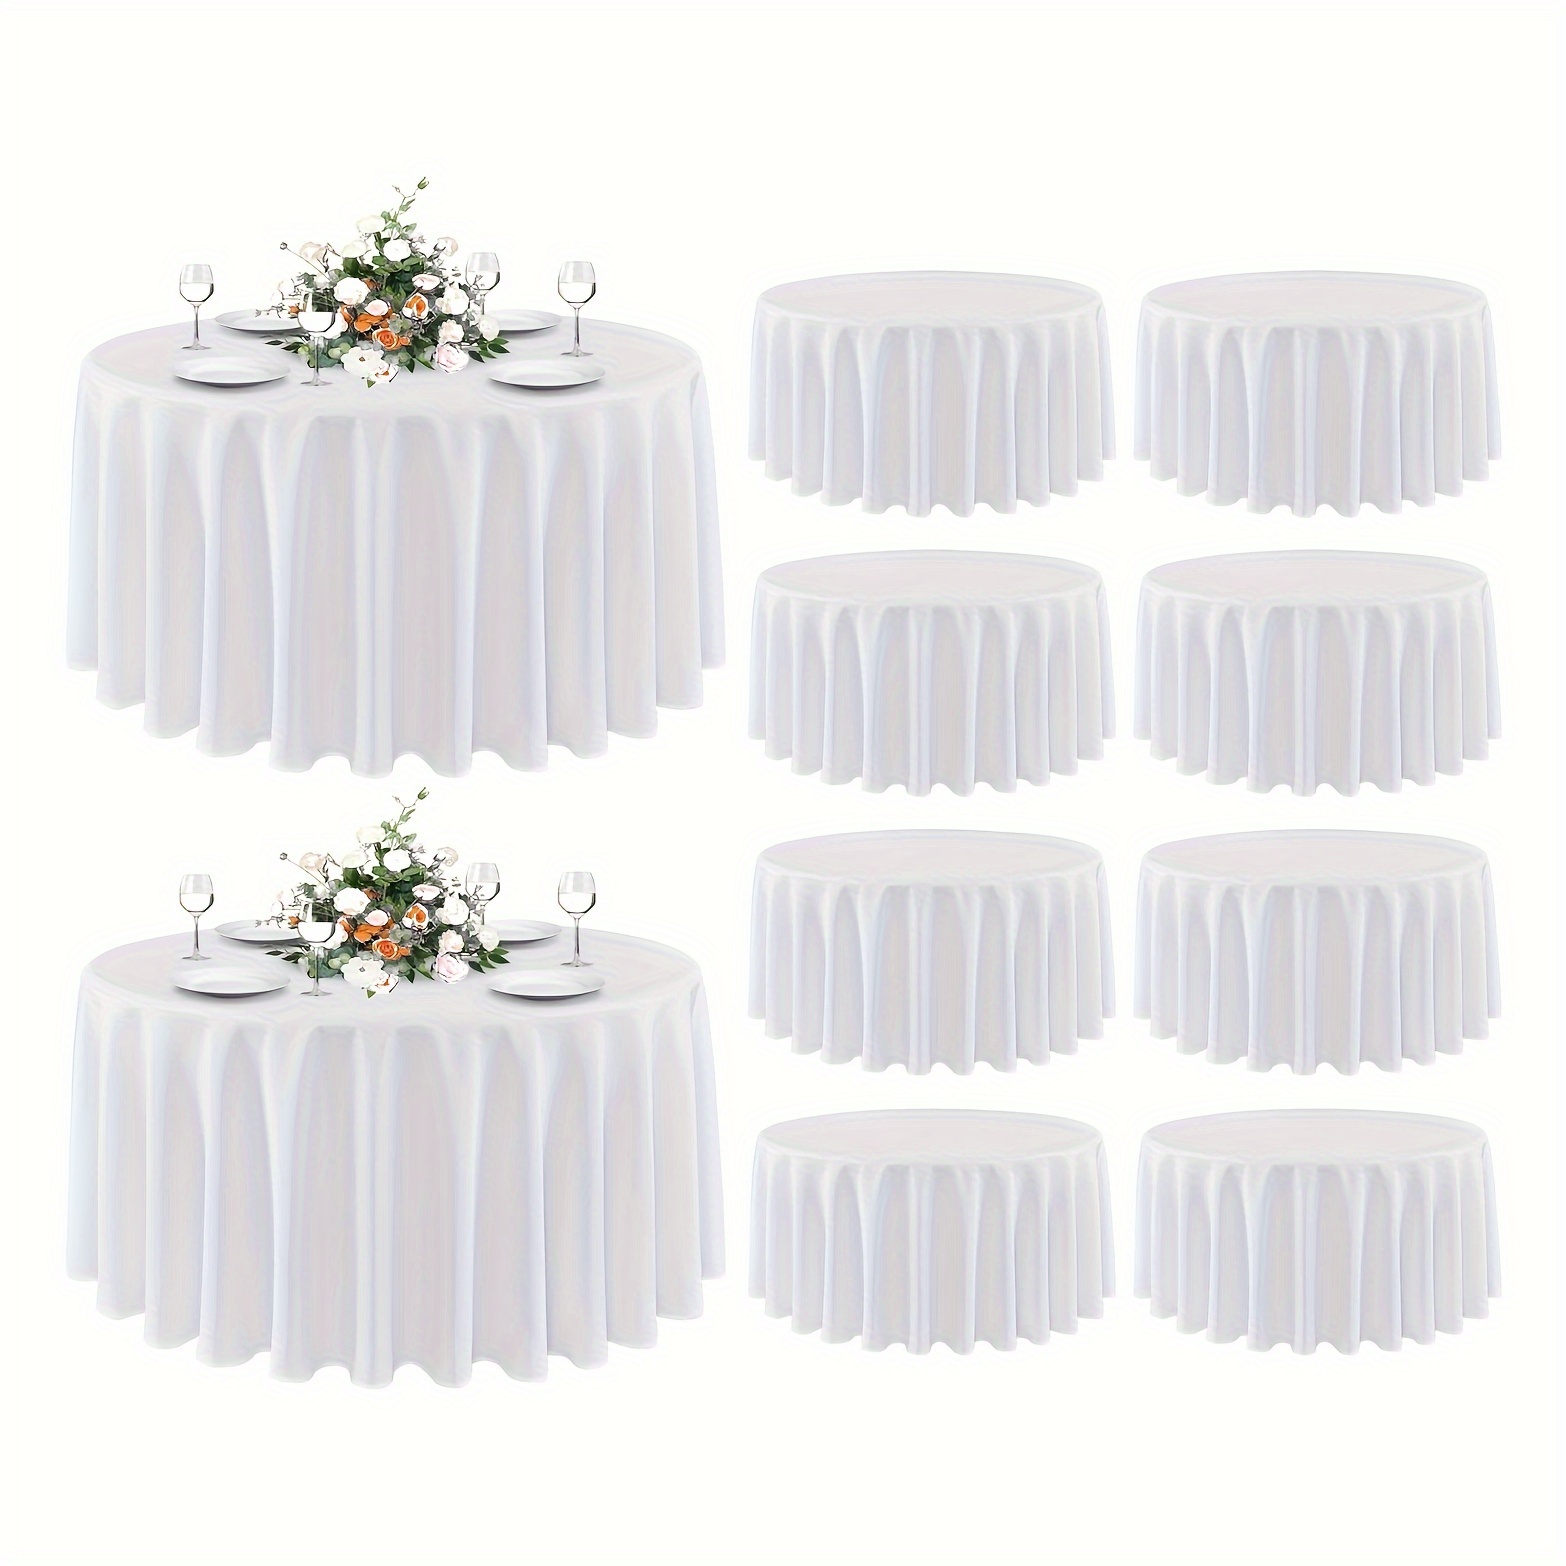 

10 Pack 90" White Round Tablecloths - Polyester, Stain & Wrinkle Resistant, Washable Covers For Dining, Buffet Parties, Camping